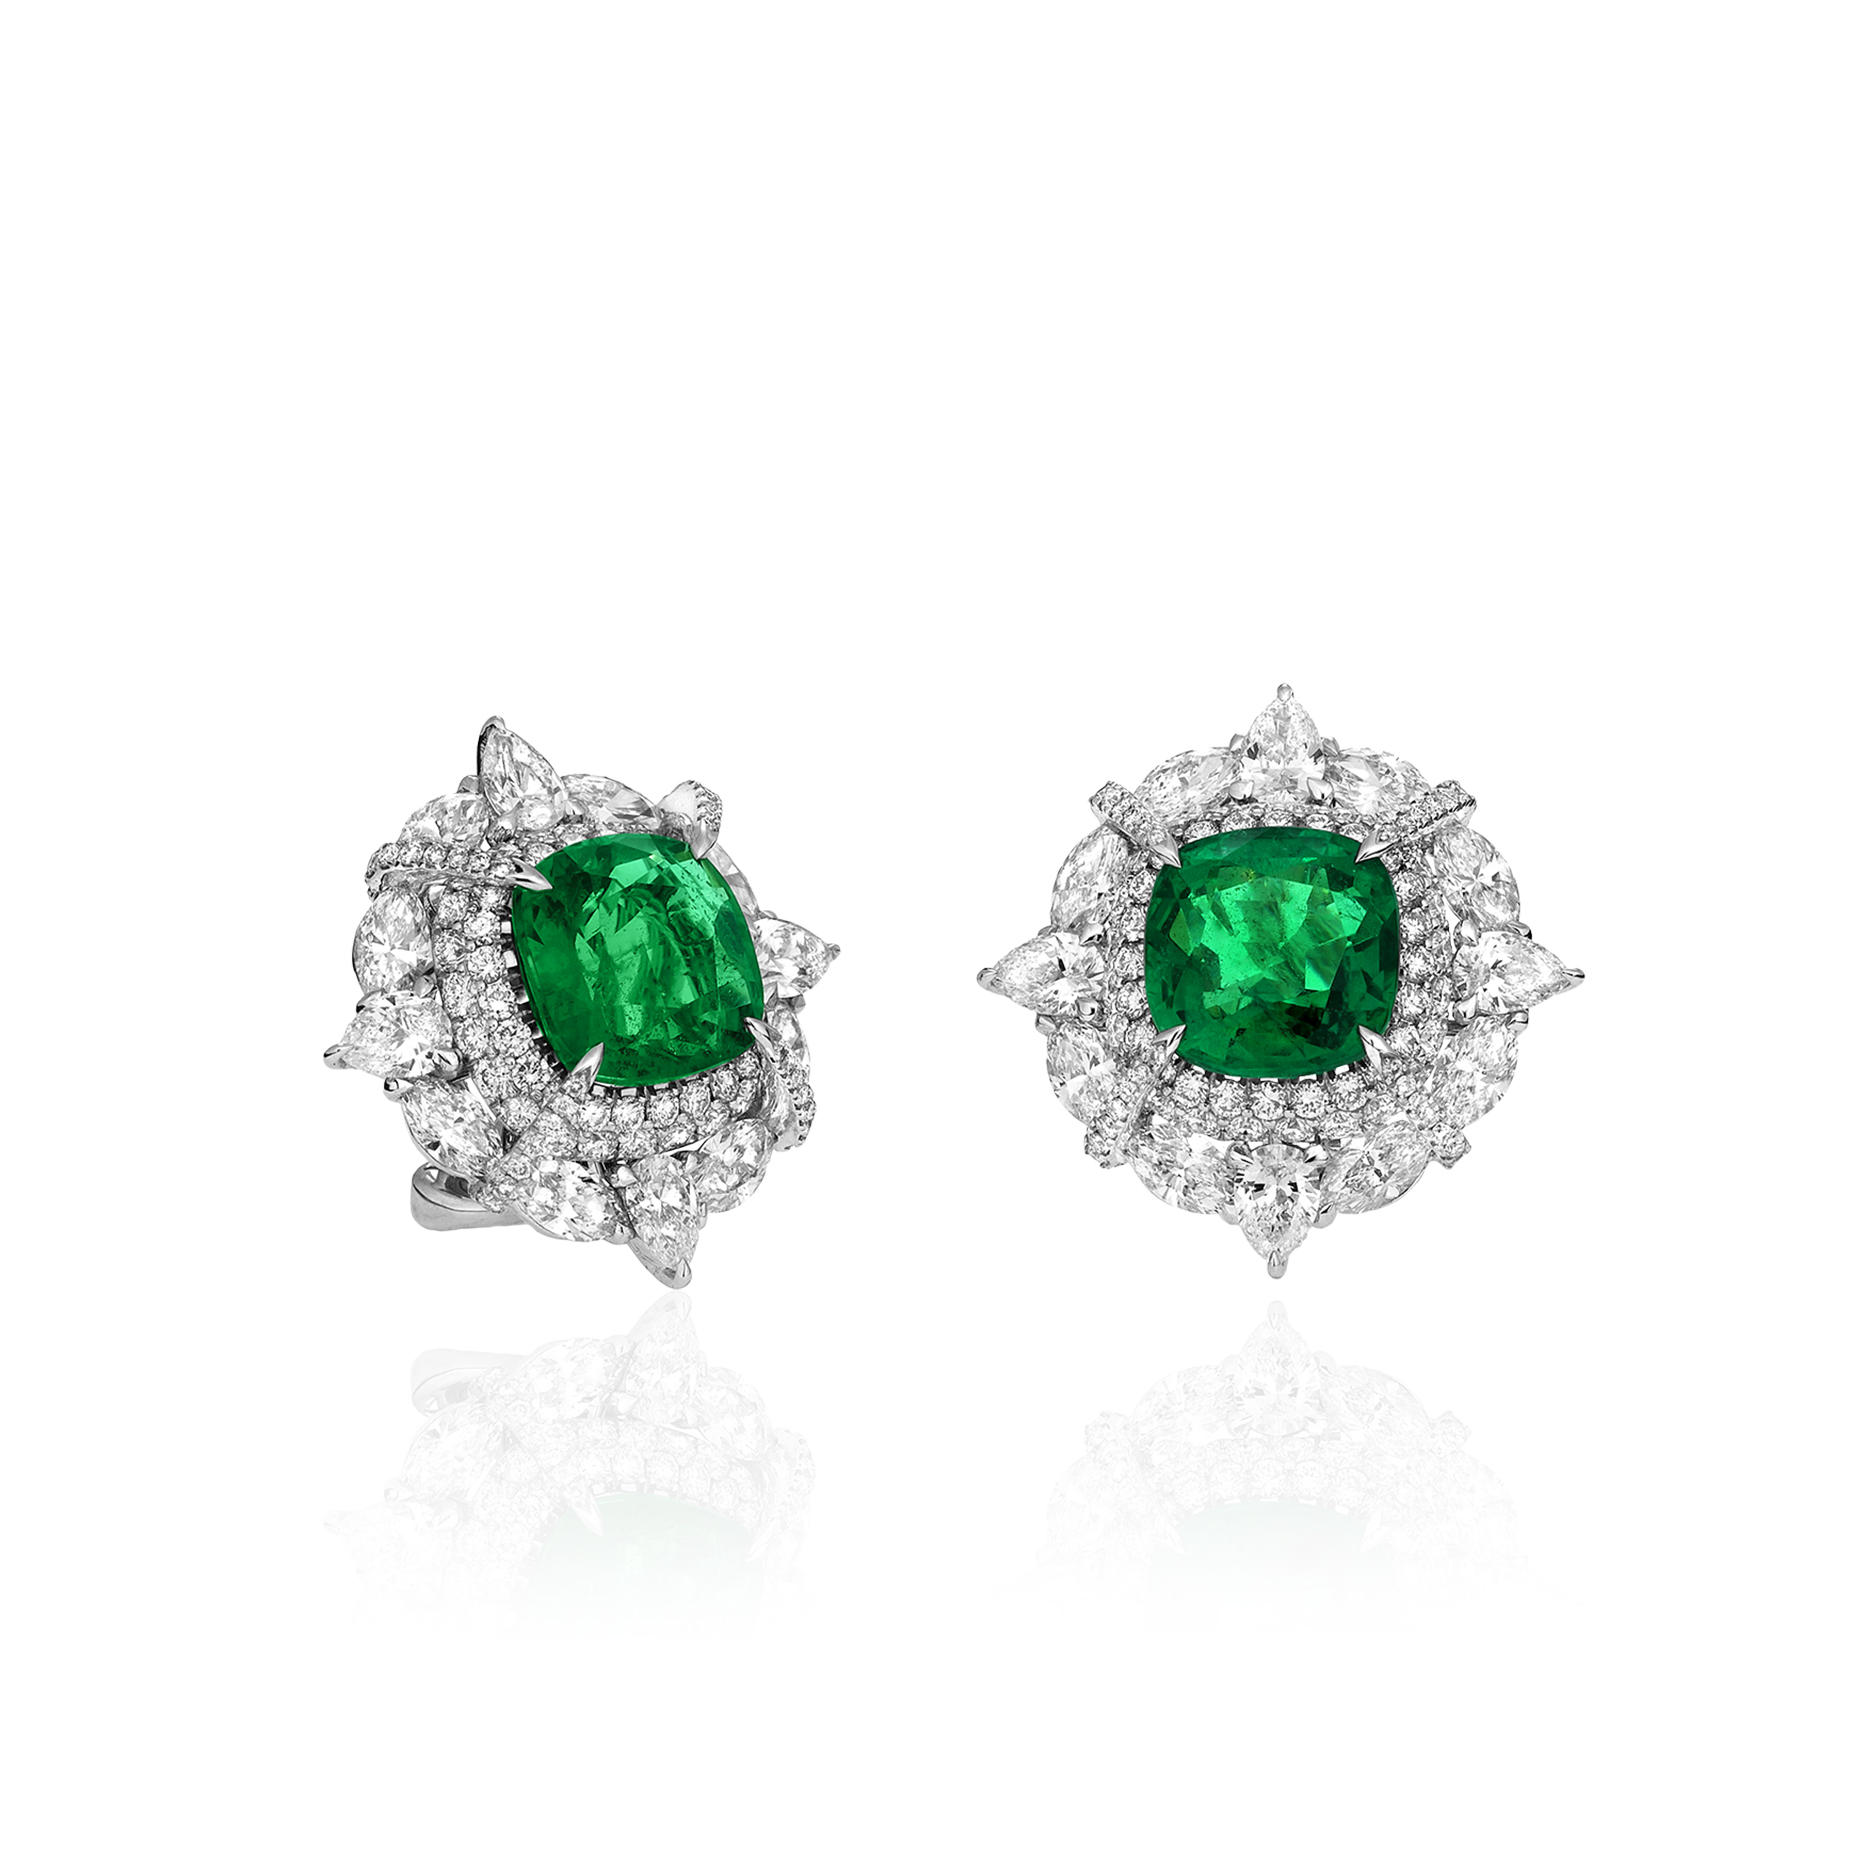 Valani Atelier Bespoke Emerald Jewelry is the Perfect Gift for Mother’s Day